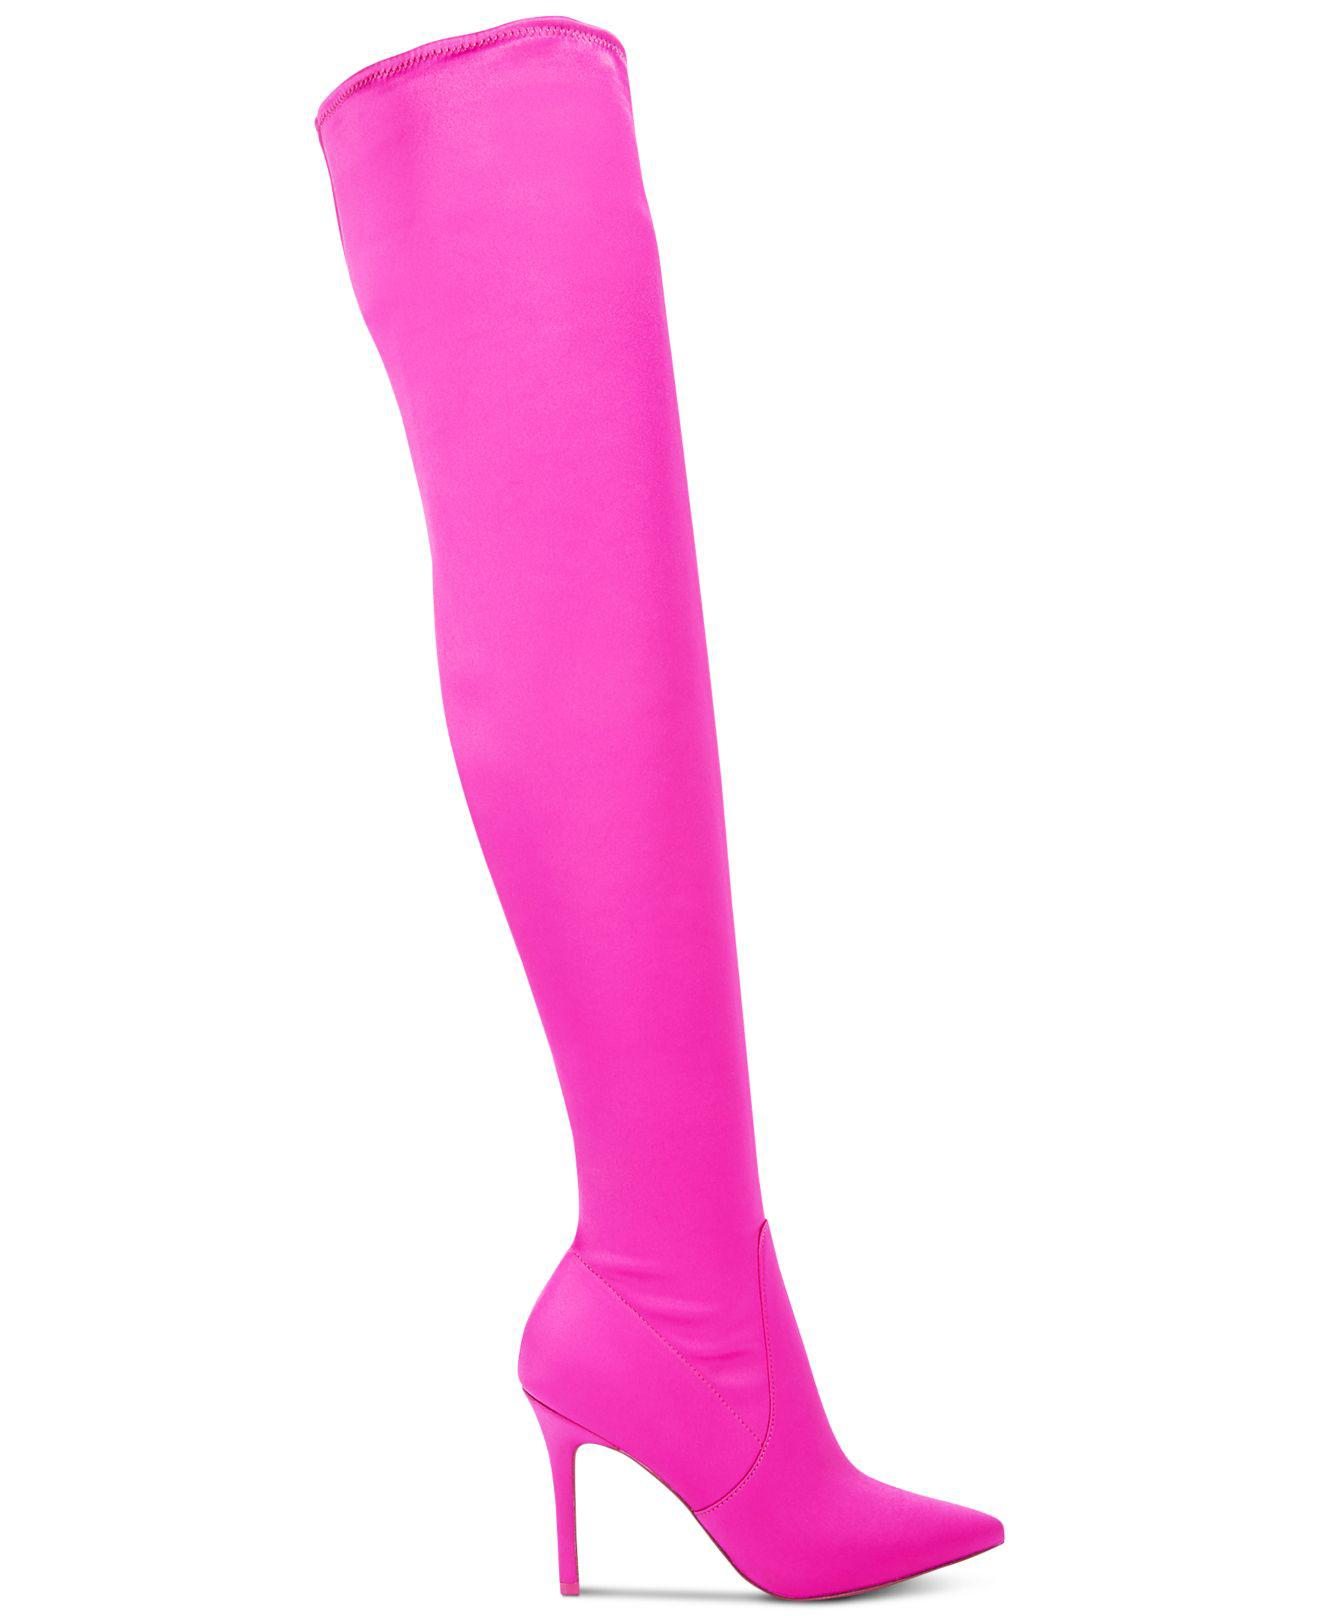 Permanent Herske sprogfærdighed ALDO Sailors Satin Stretch Over-the-knee Dress Boots in Fuchsia (Pink) -  Lyst